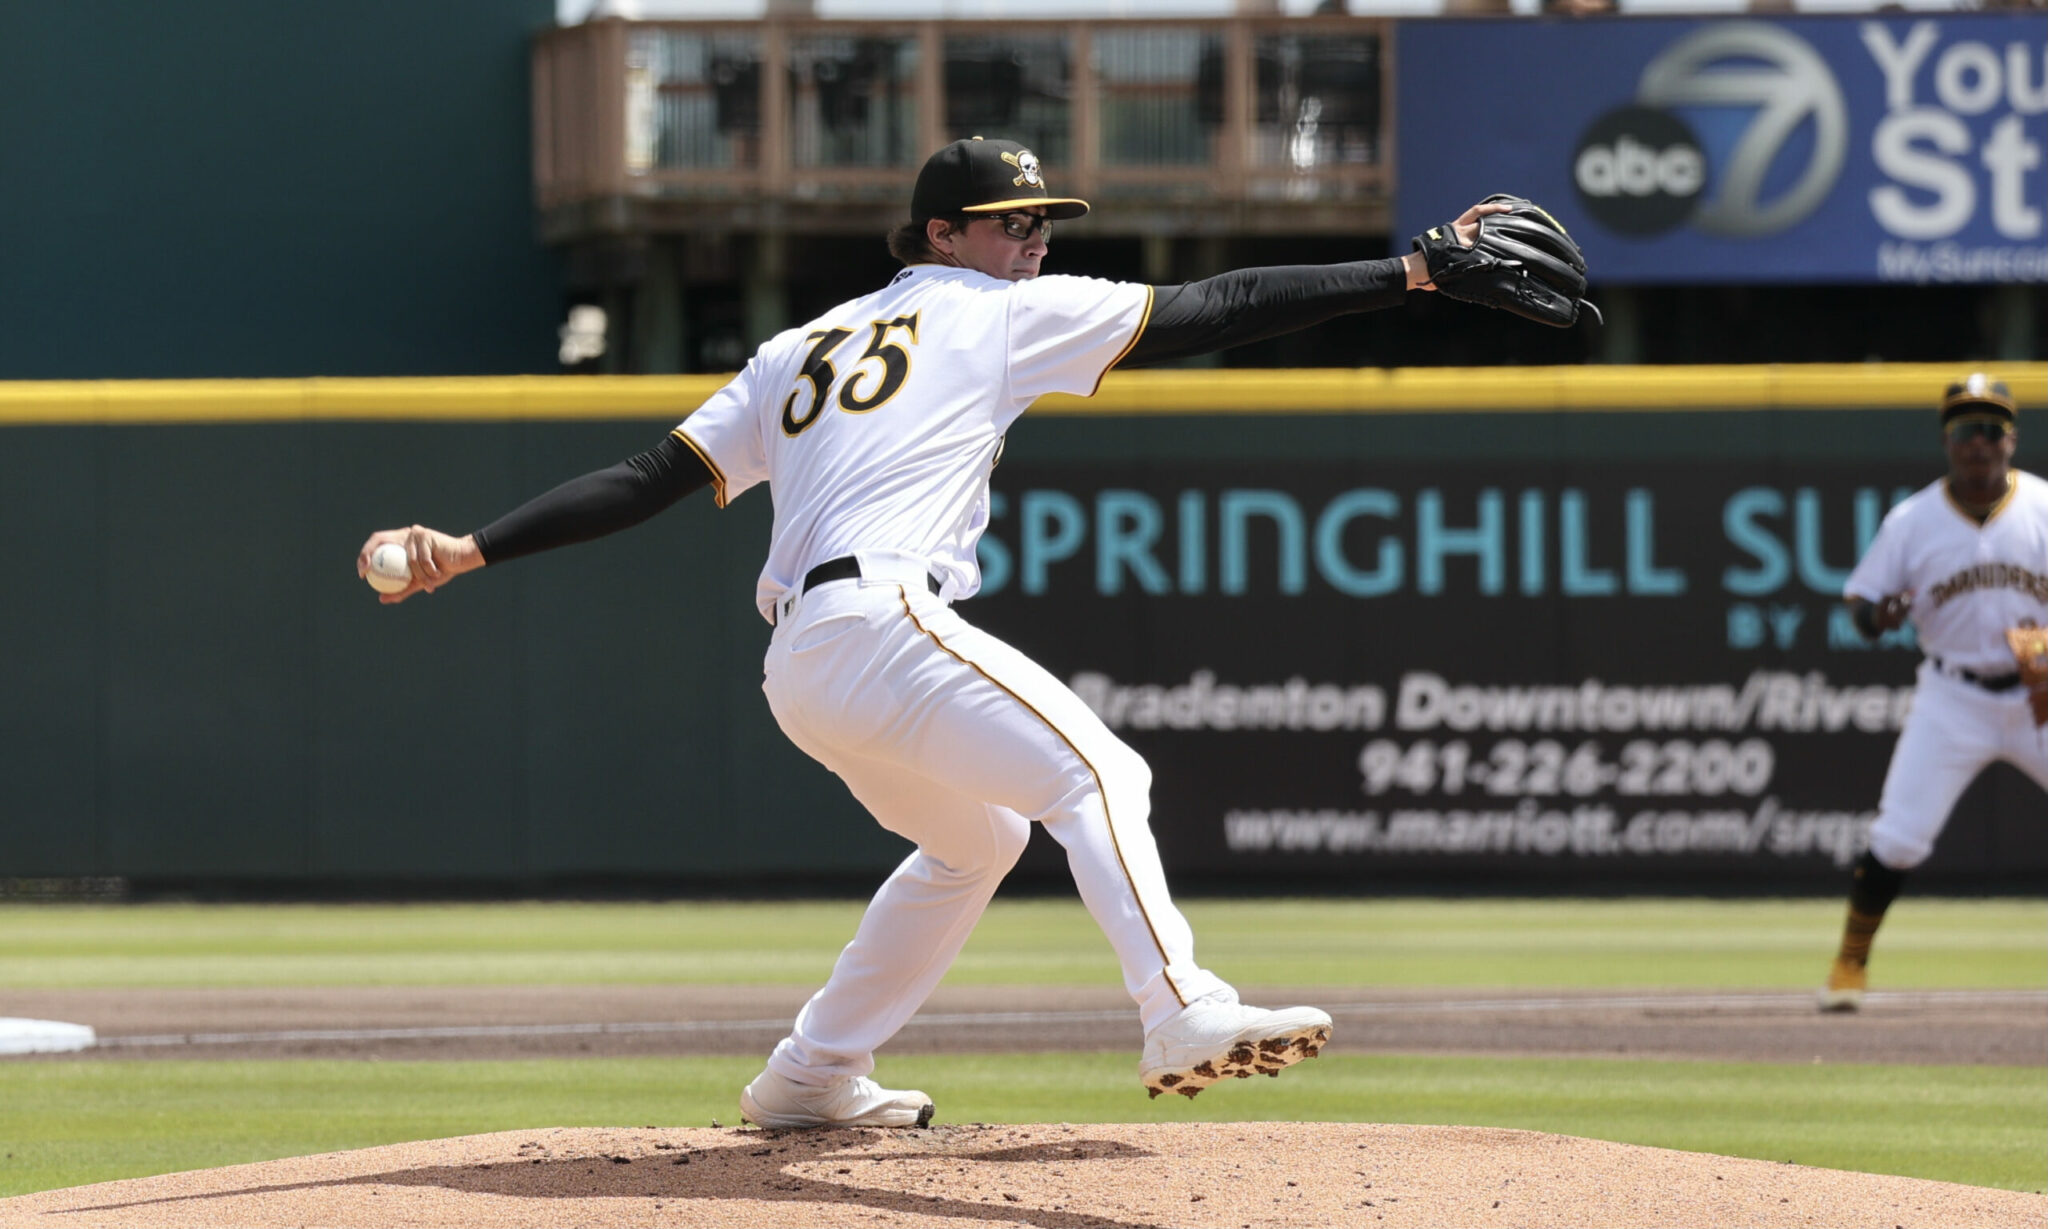 Pirates Pitching Prospects Who Could Take A Big Step Forward In 2023